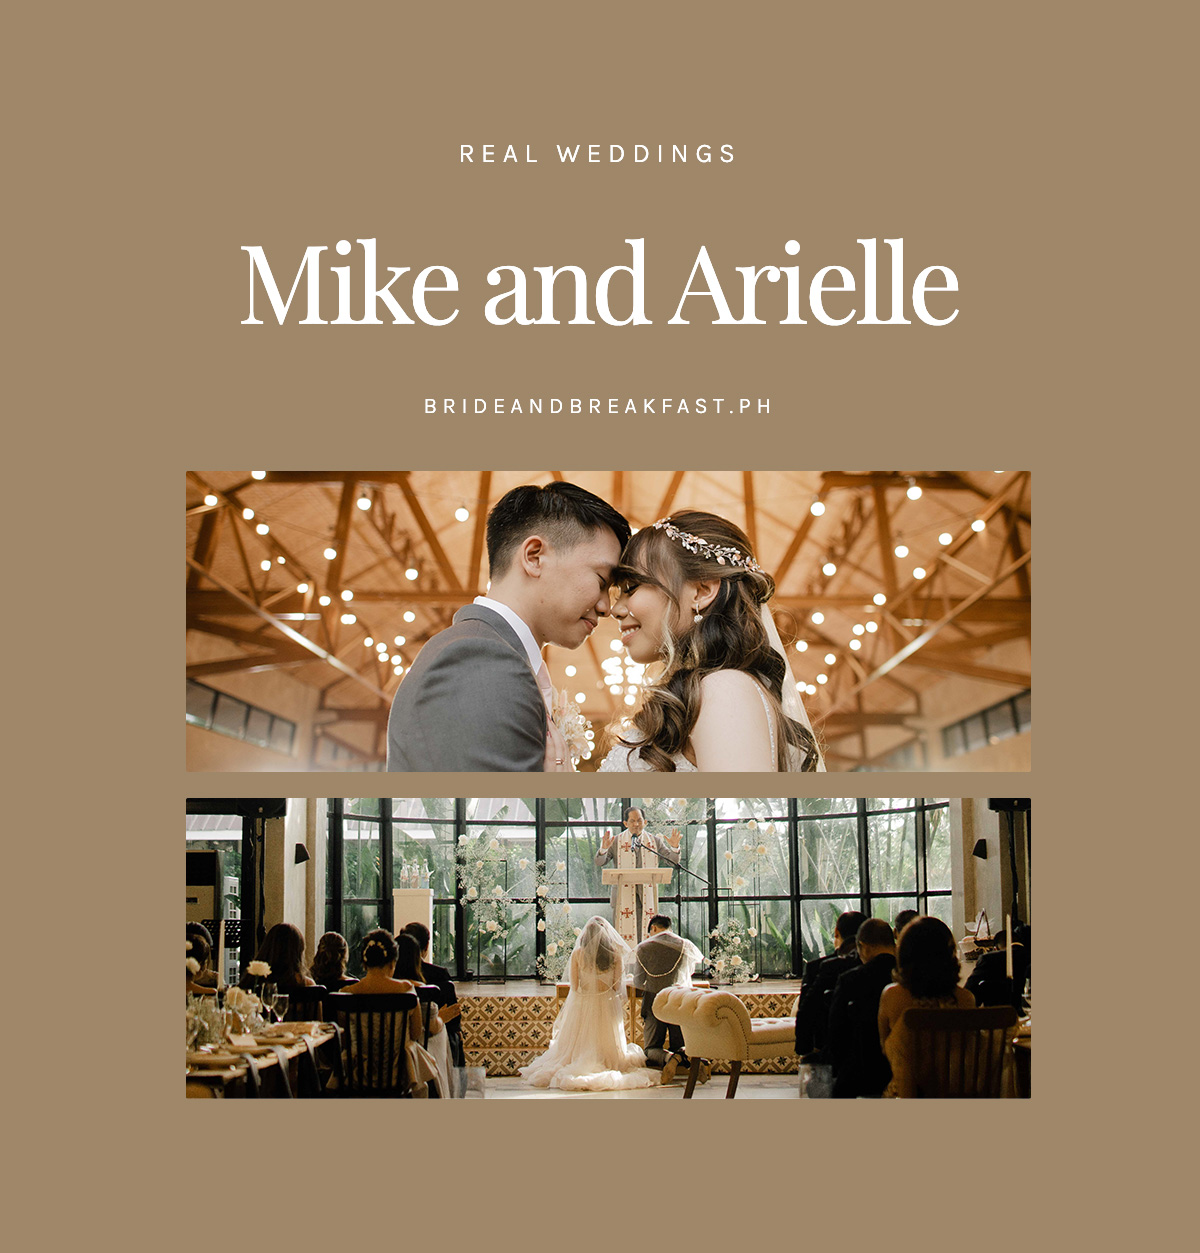 Mike and Arielle